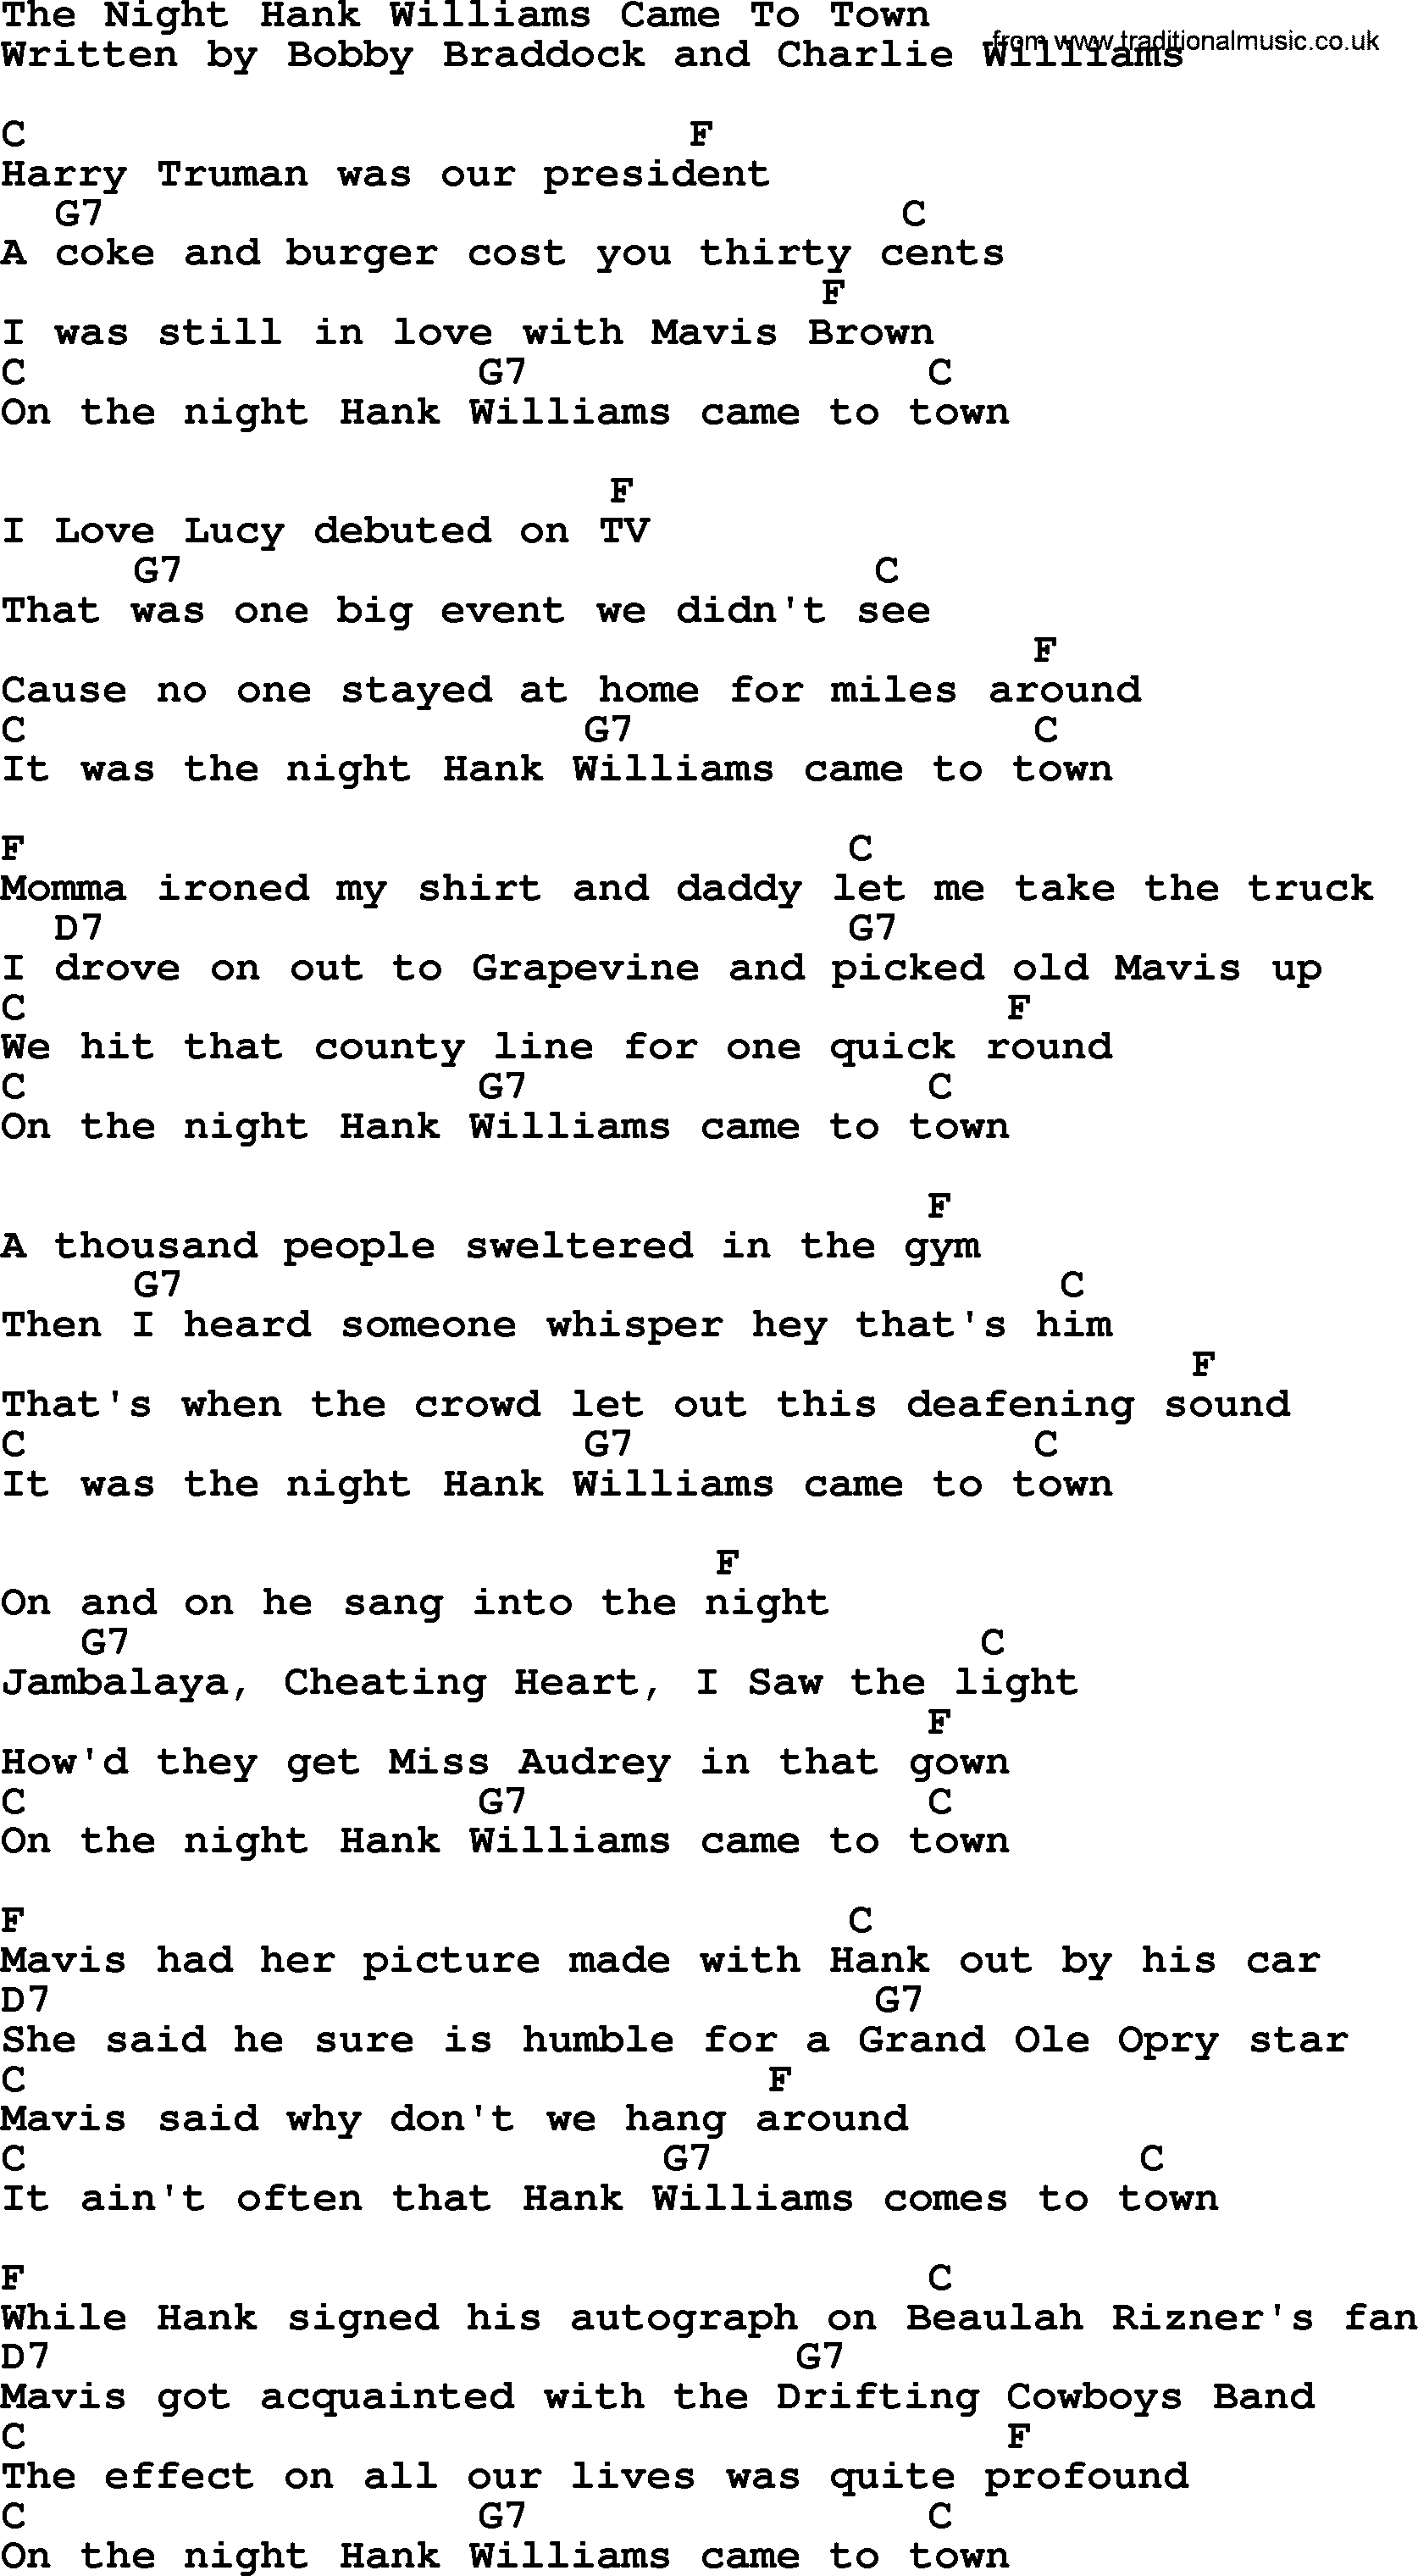 Johnny Cash song The Night Hank Williams Came To Town, lyrics and chords